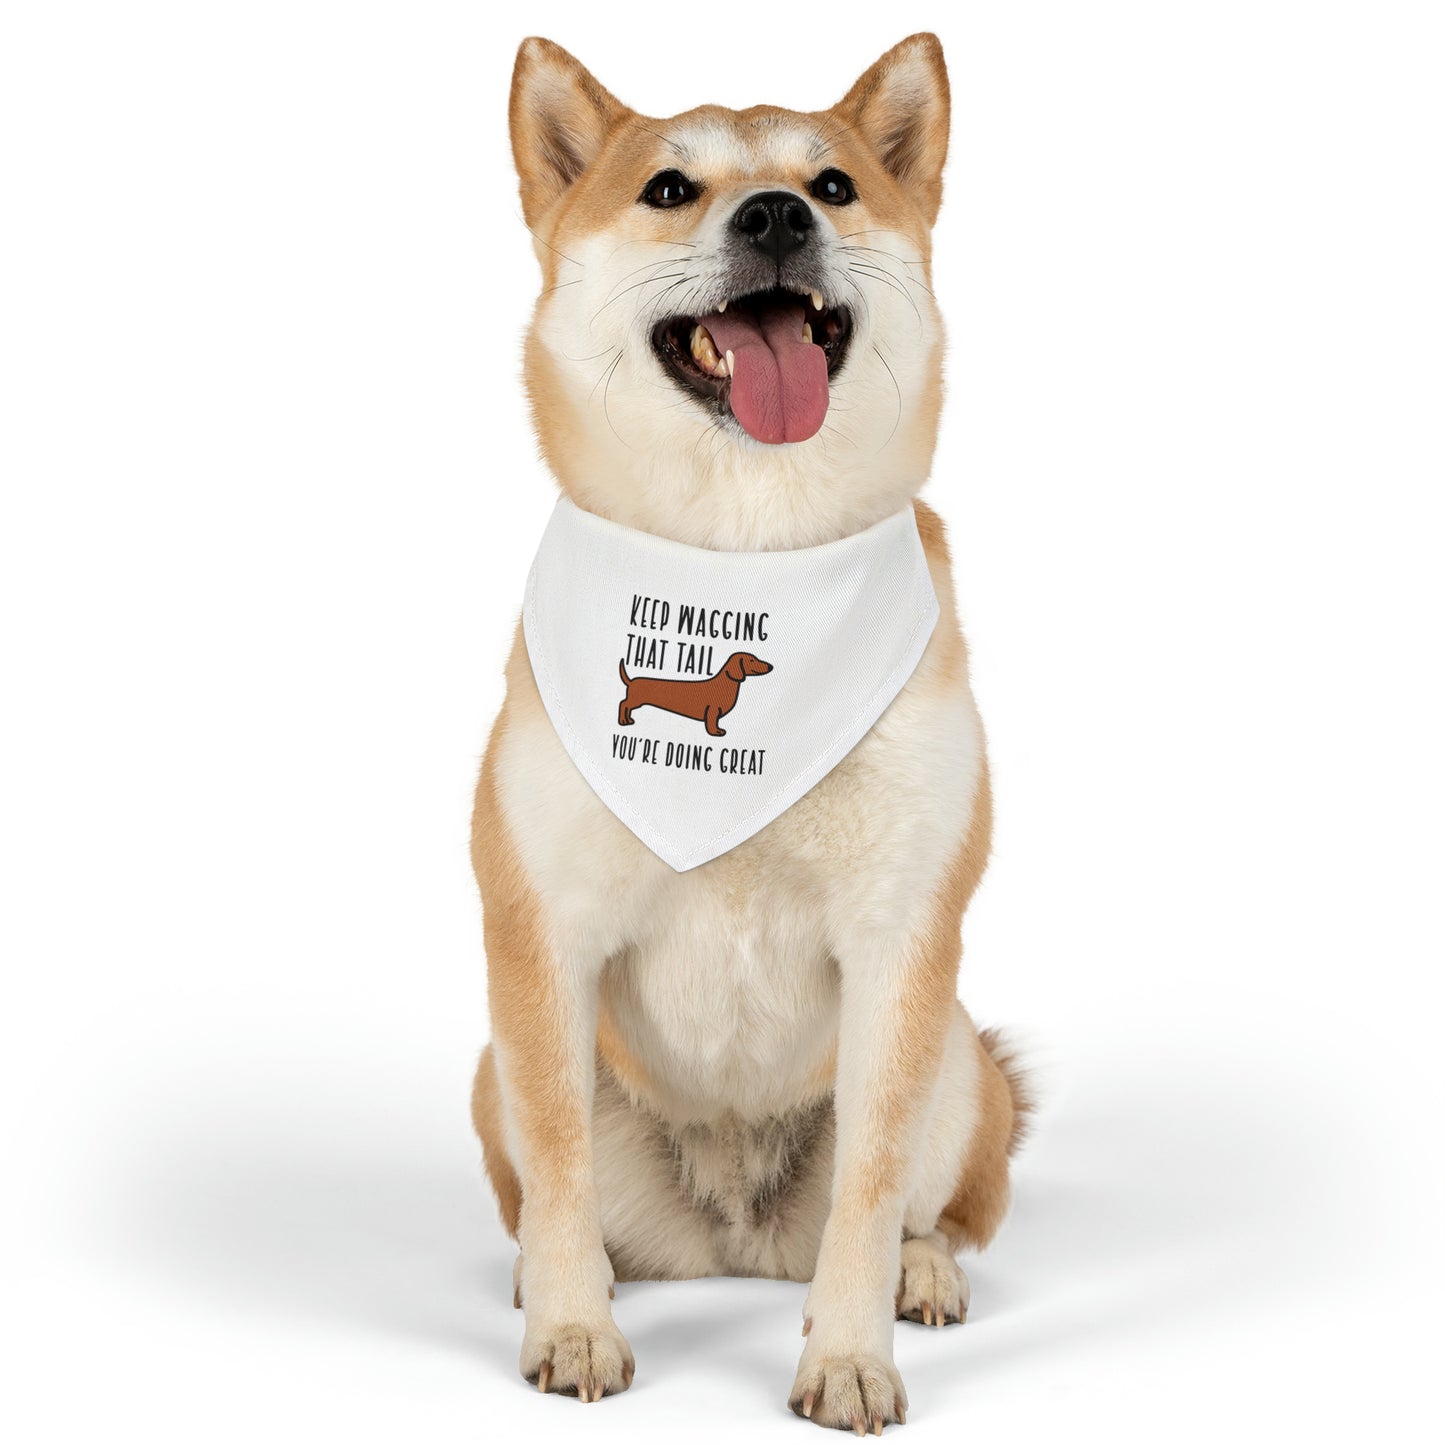 Keep Wagging That Tale, You Are Doing Great, Dog Lovers, By Art Designs Dog Pet Bandana Collar